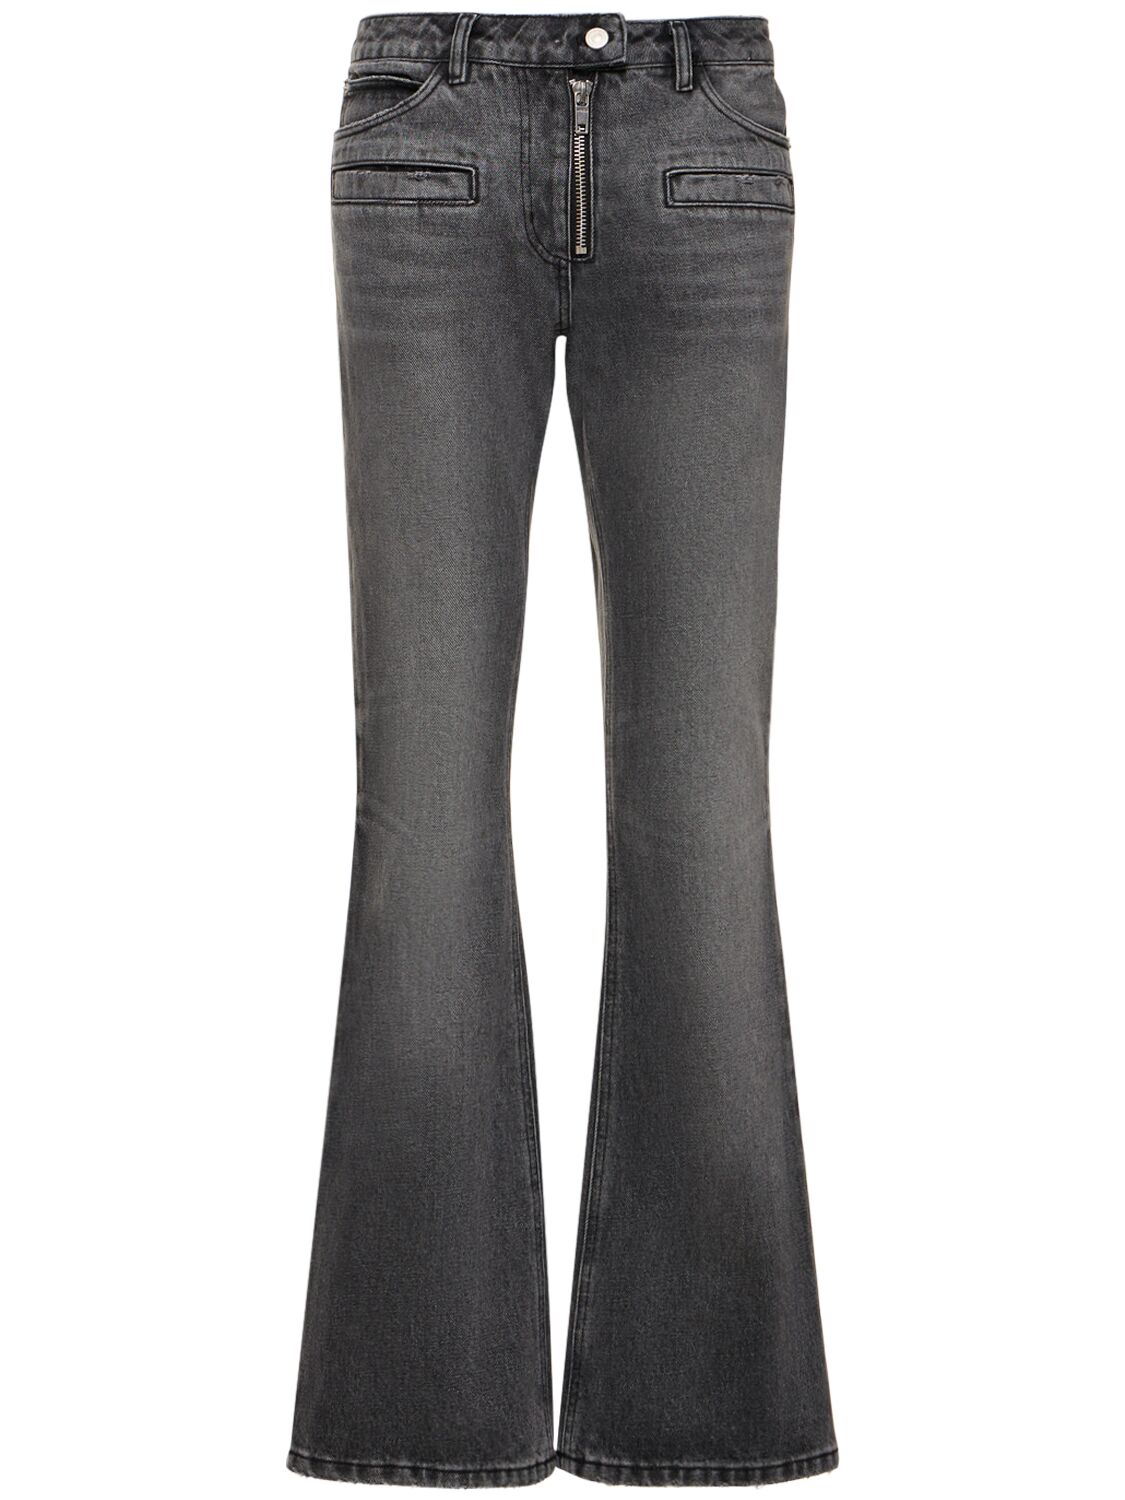 Image of Zipped Denim Bootcut Jeans